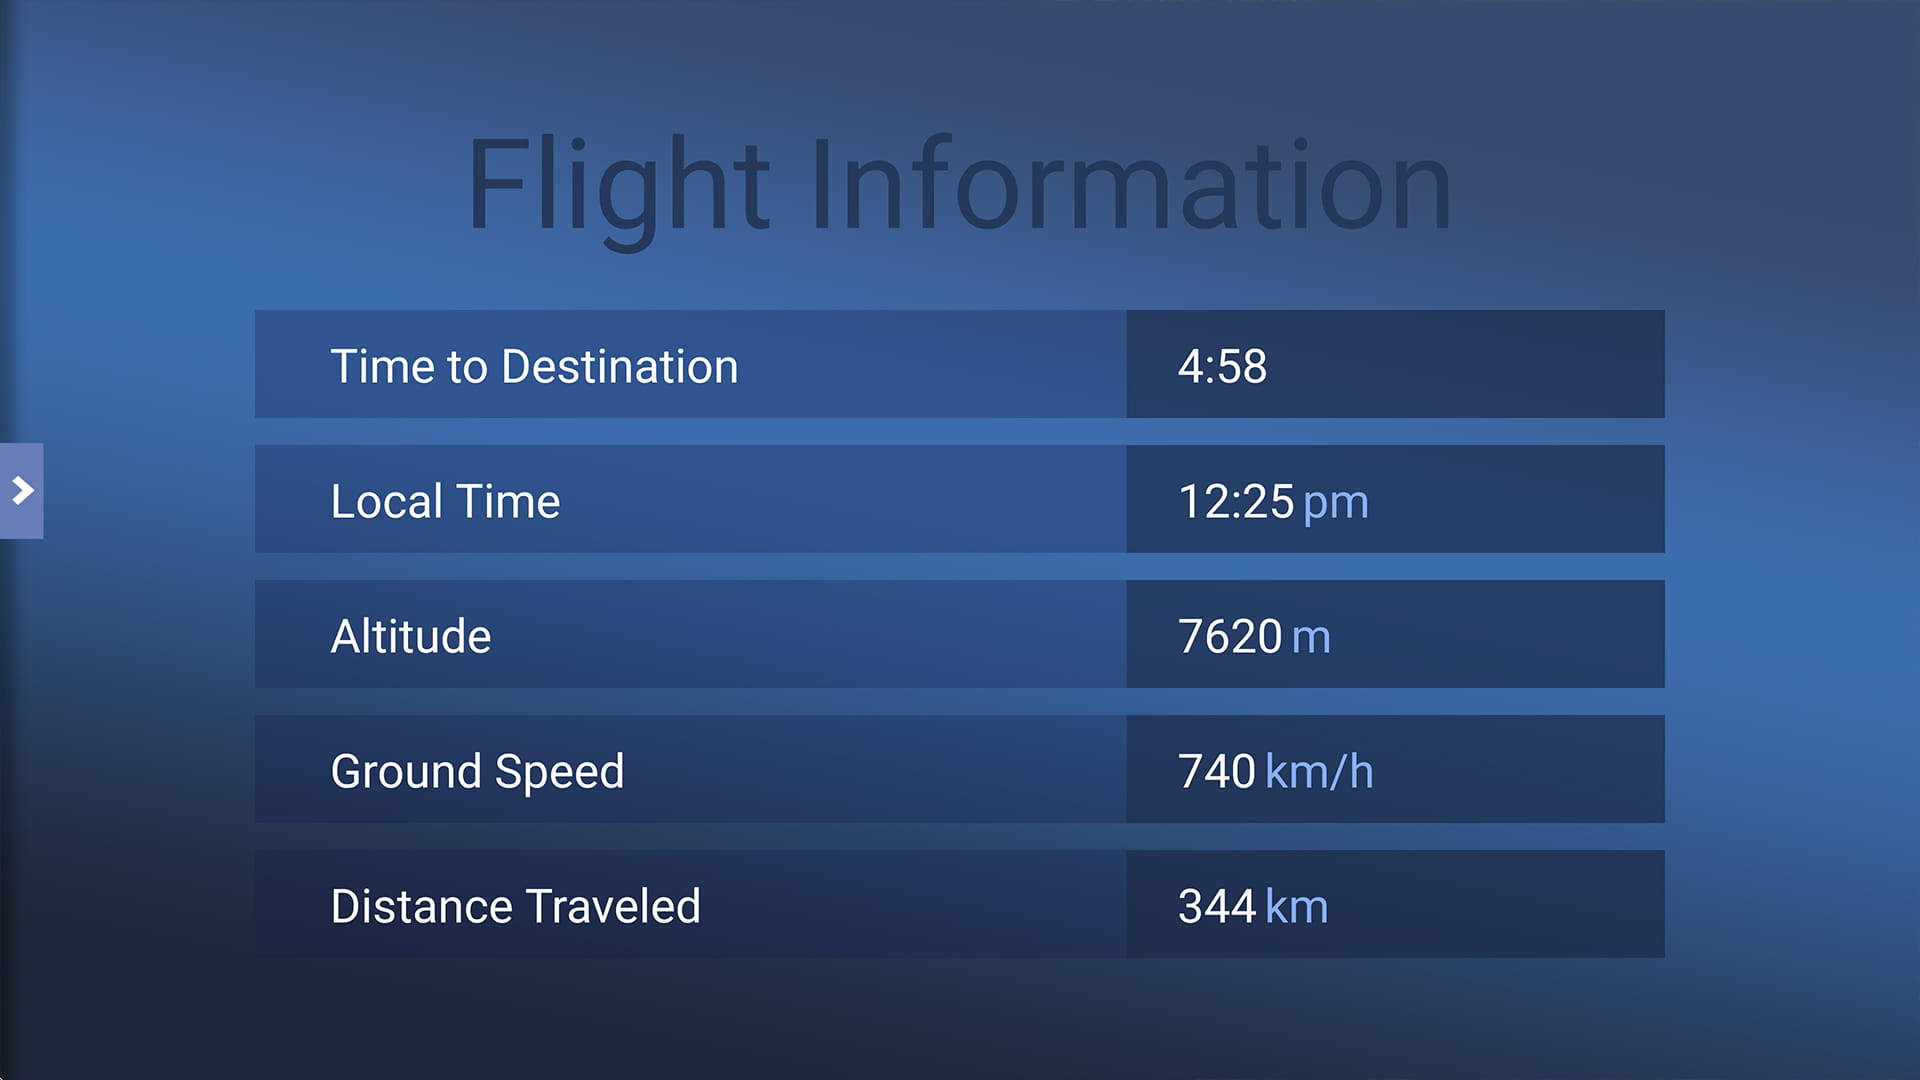 Airshow Moving Maps display showing flight information such as time to destination, local time and altitude.